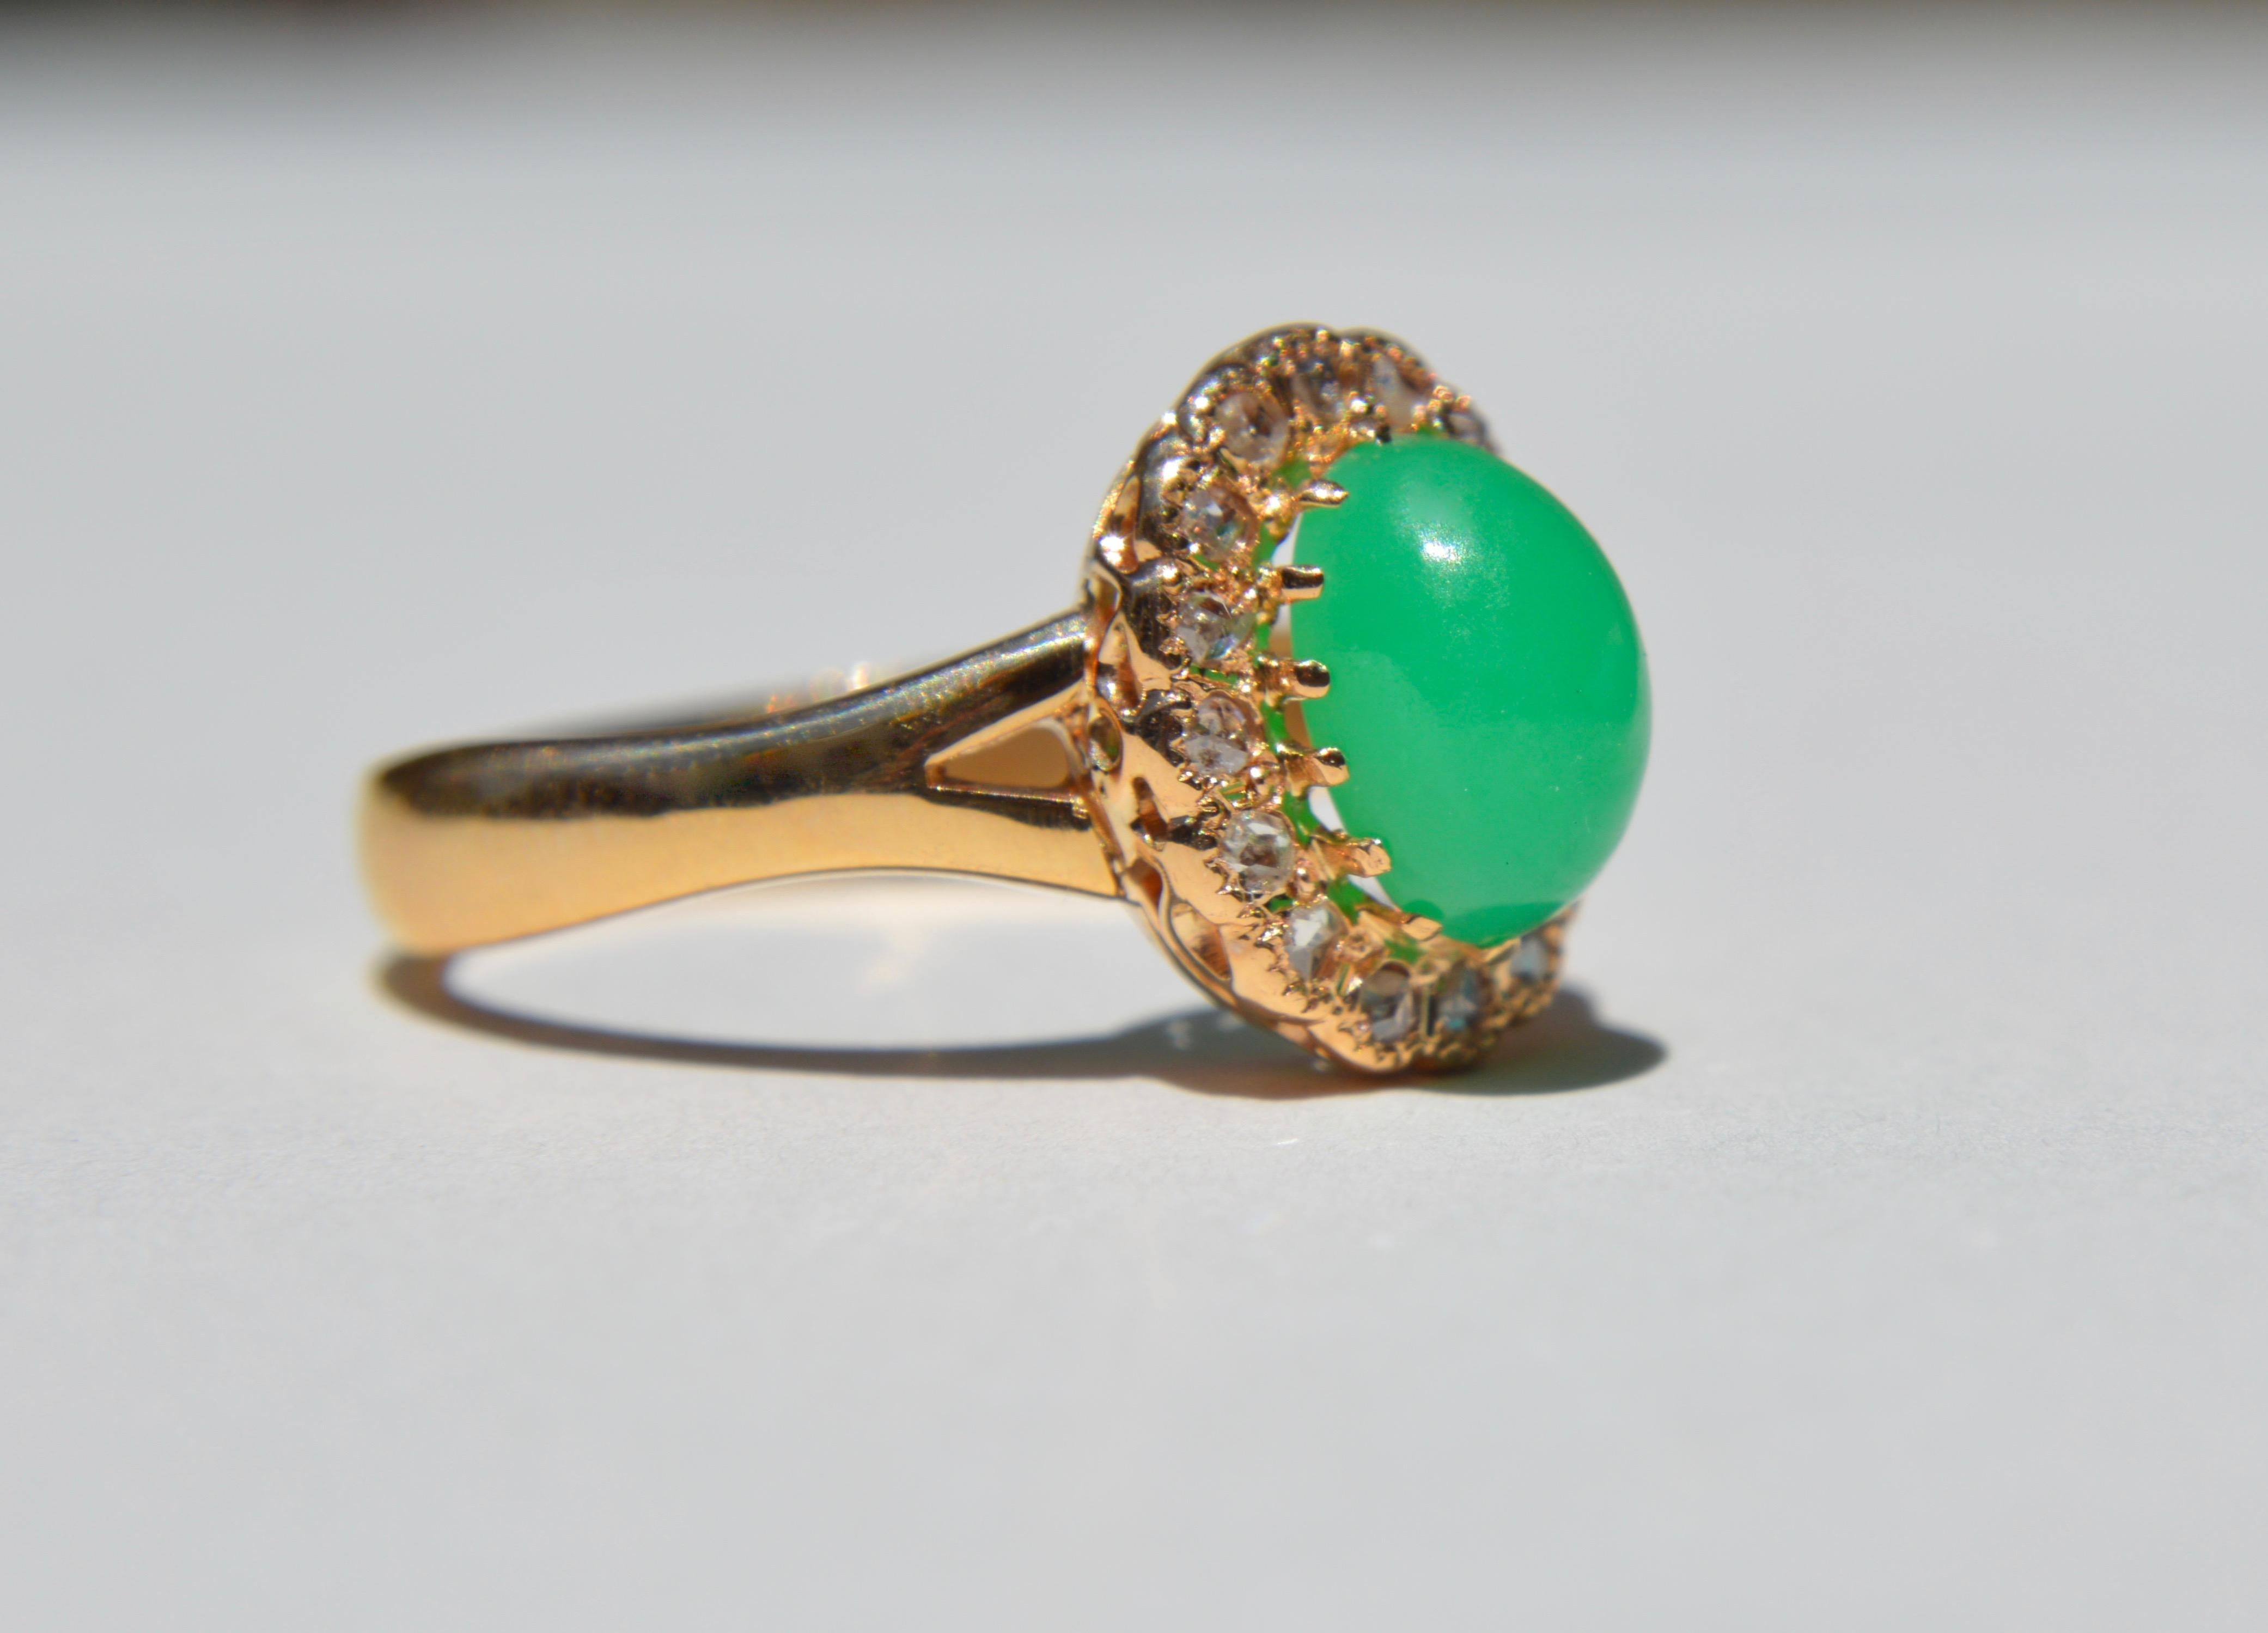 Gorgeous 1940s vintage 14K yellow gold ring with 1.40 carat chrysoprase cabochon surrounded by 16 sparkling, clean and white rosecut diamonds, 1.3mm each in diameter. Size 6.75, can easily be resized by a jeweler. In very good condition. Diamonds